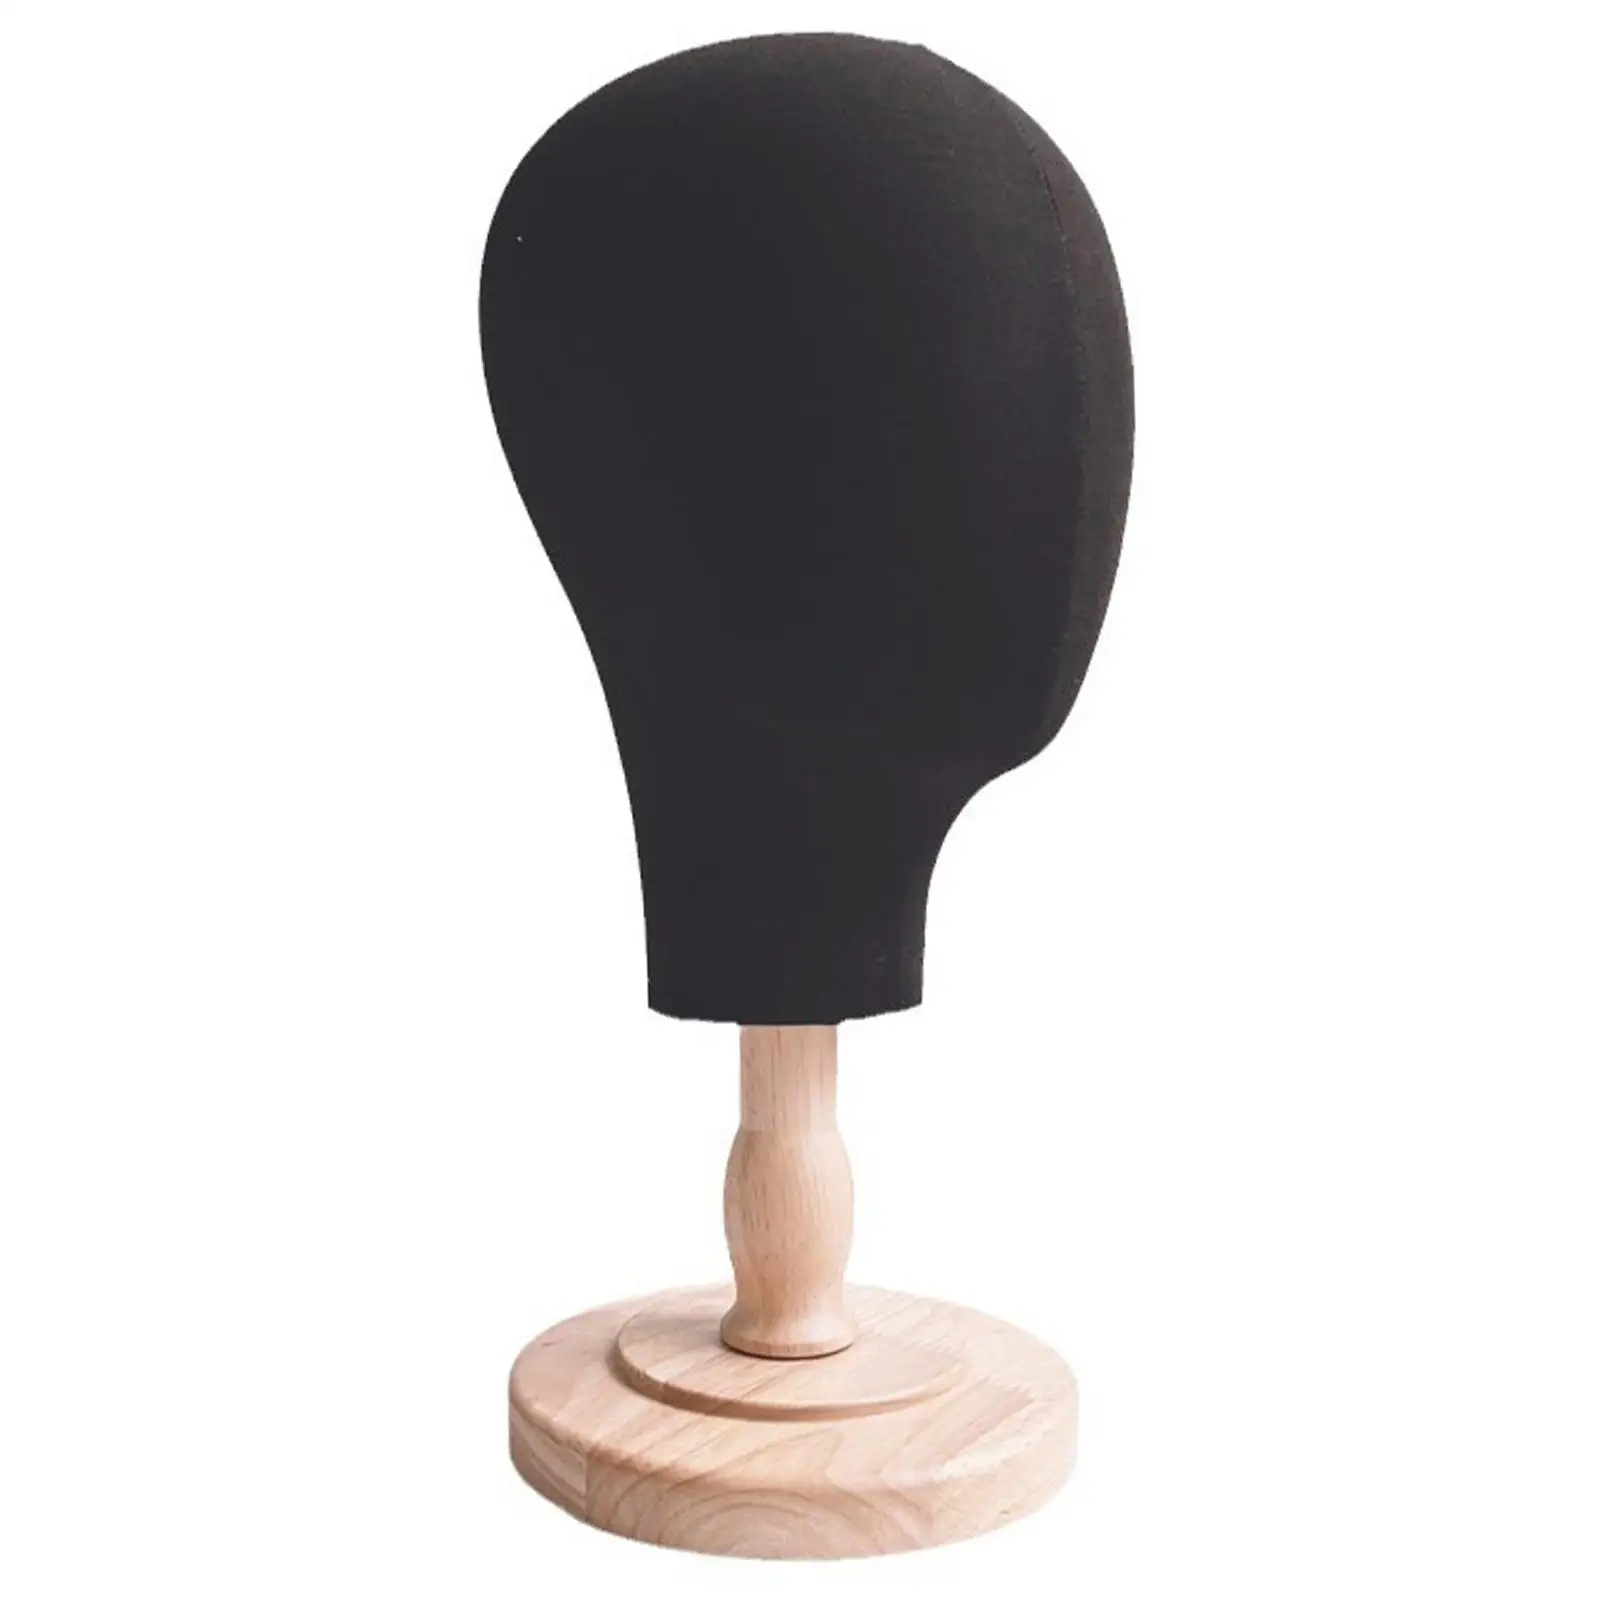 Manikin Head Insertable Pins Sturdy Hats Wig Display Stand with Wood Base Wig Head Model for Hat Jewelry Scarves Glasses Headset